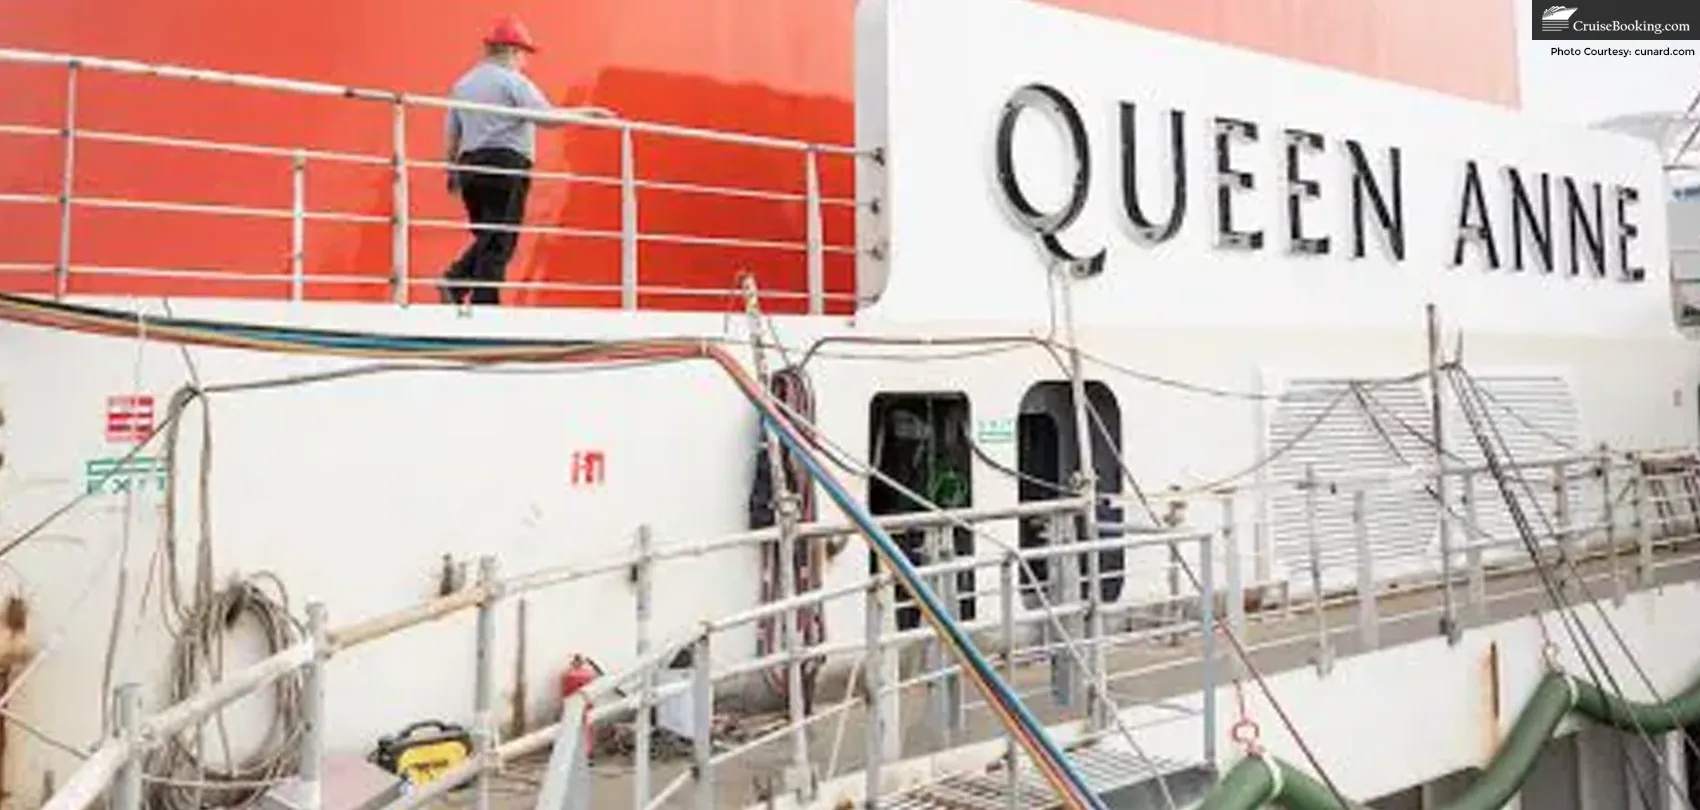 Cunard’s Begins Six-Month Countdown to Queen Anne’s Debut